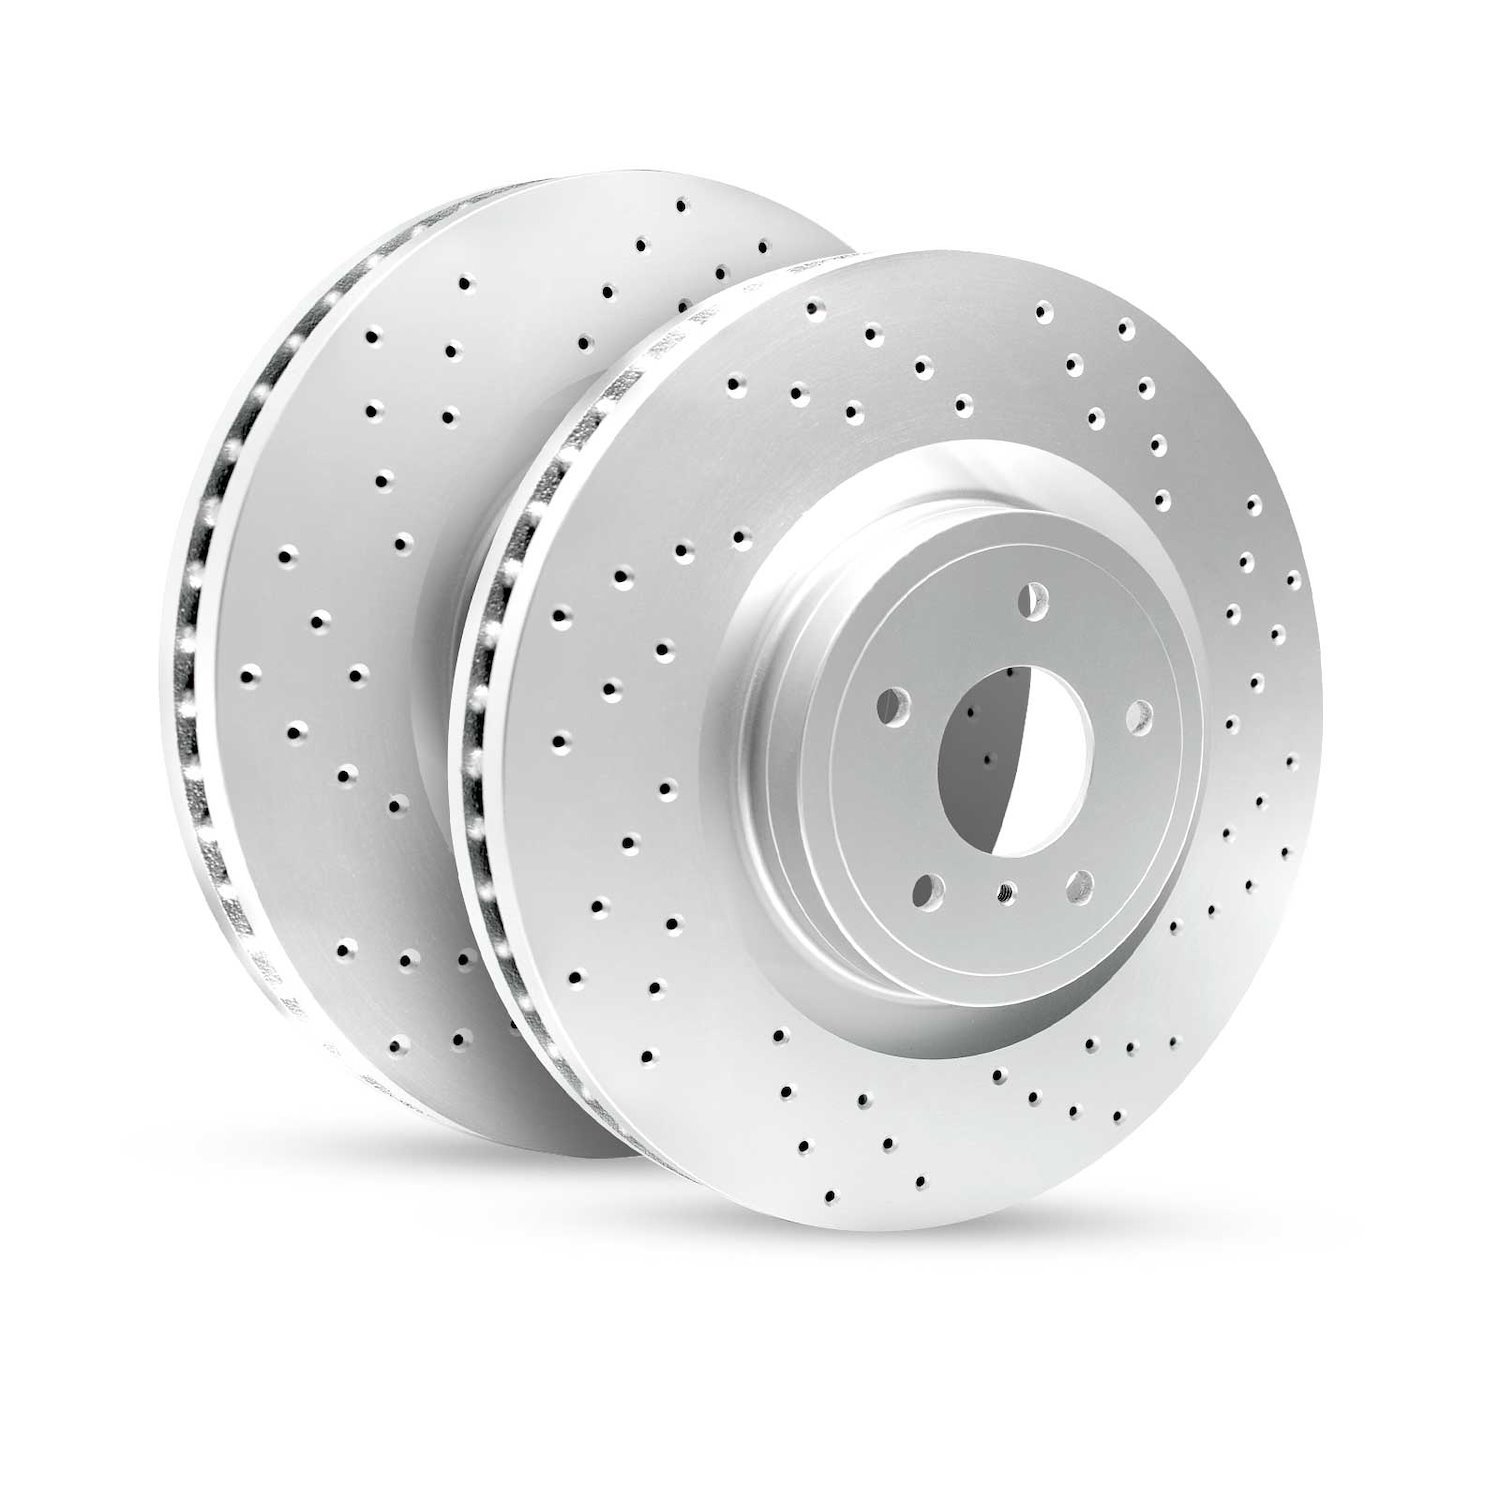 GEO-Carbon Drilled & Slotted Brake Rotor Set, 2006-2015 Lexus/Toyota/Scion, Position: Rear